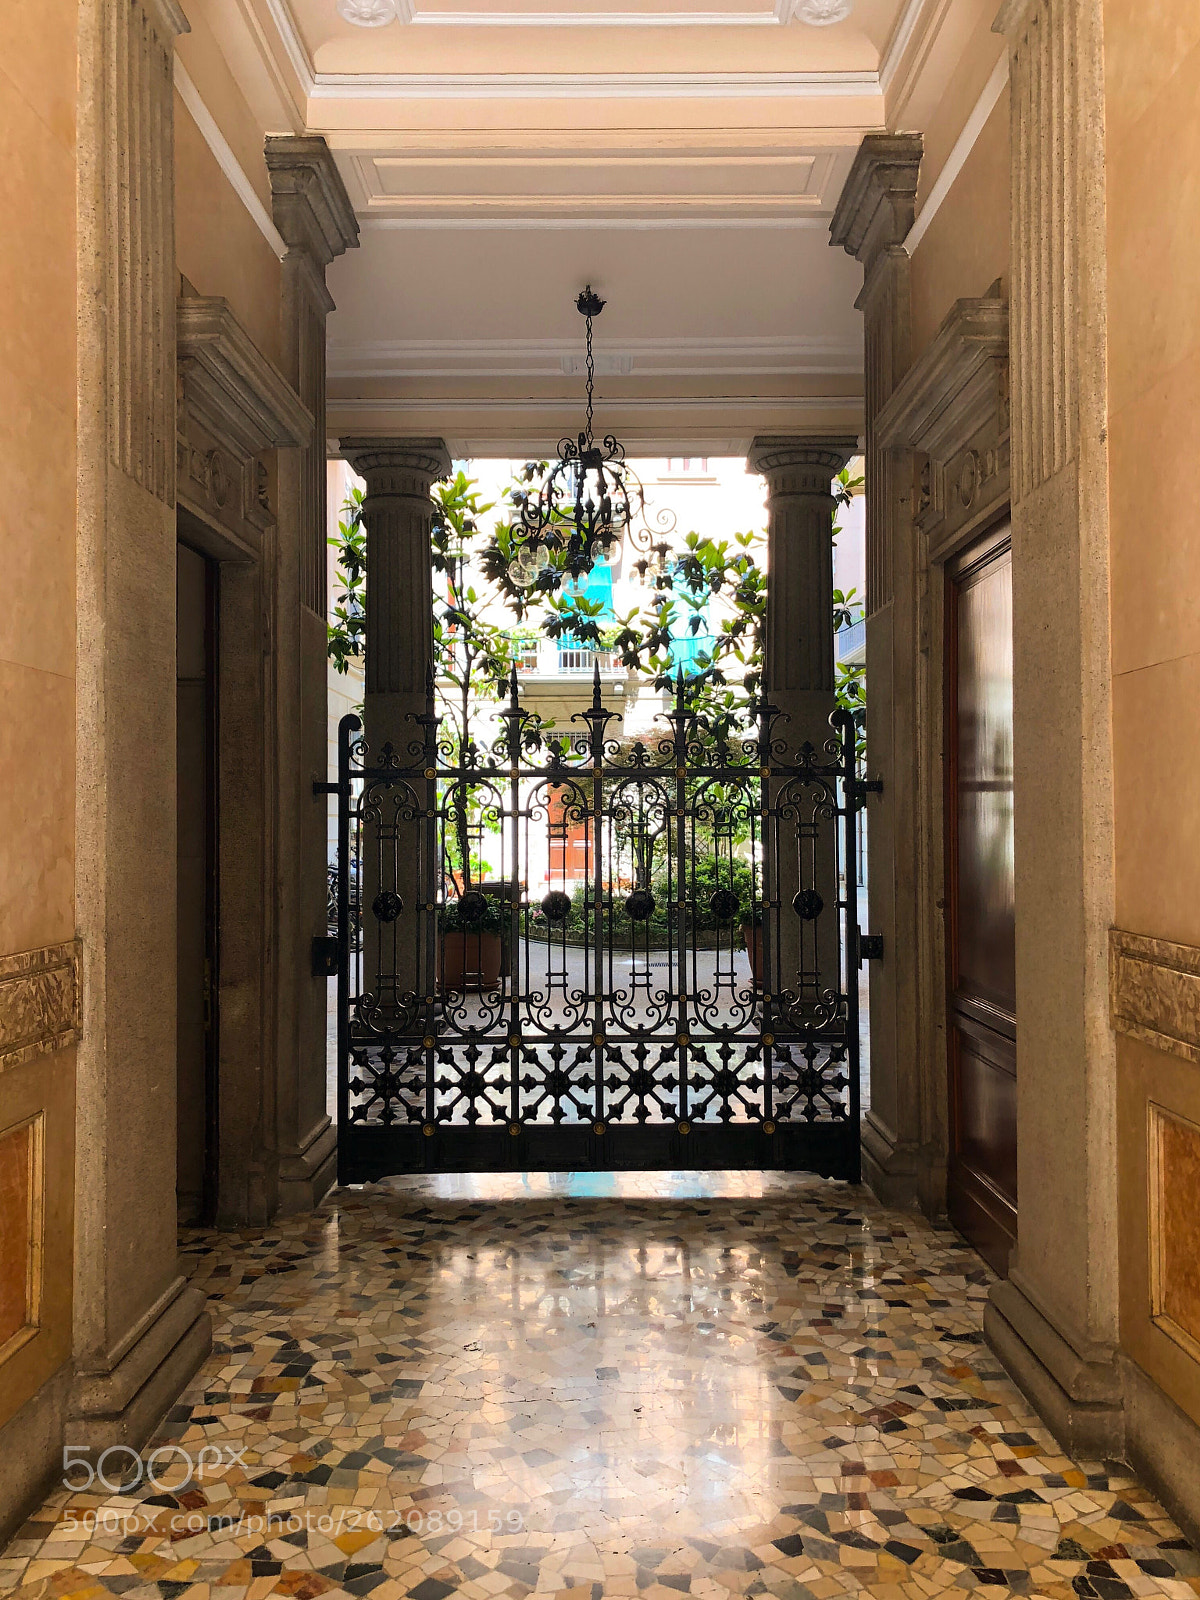 Apple iPhone 8 sample photo. The courtyards of milan photography